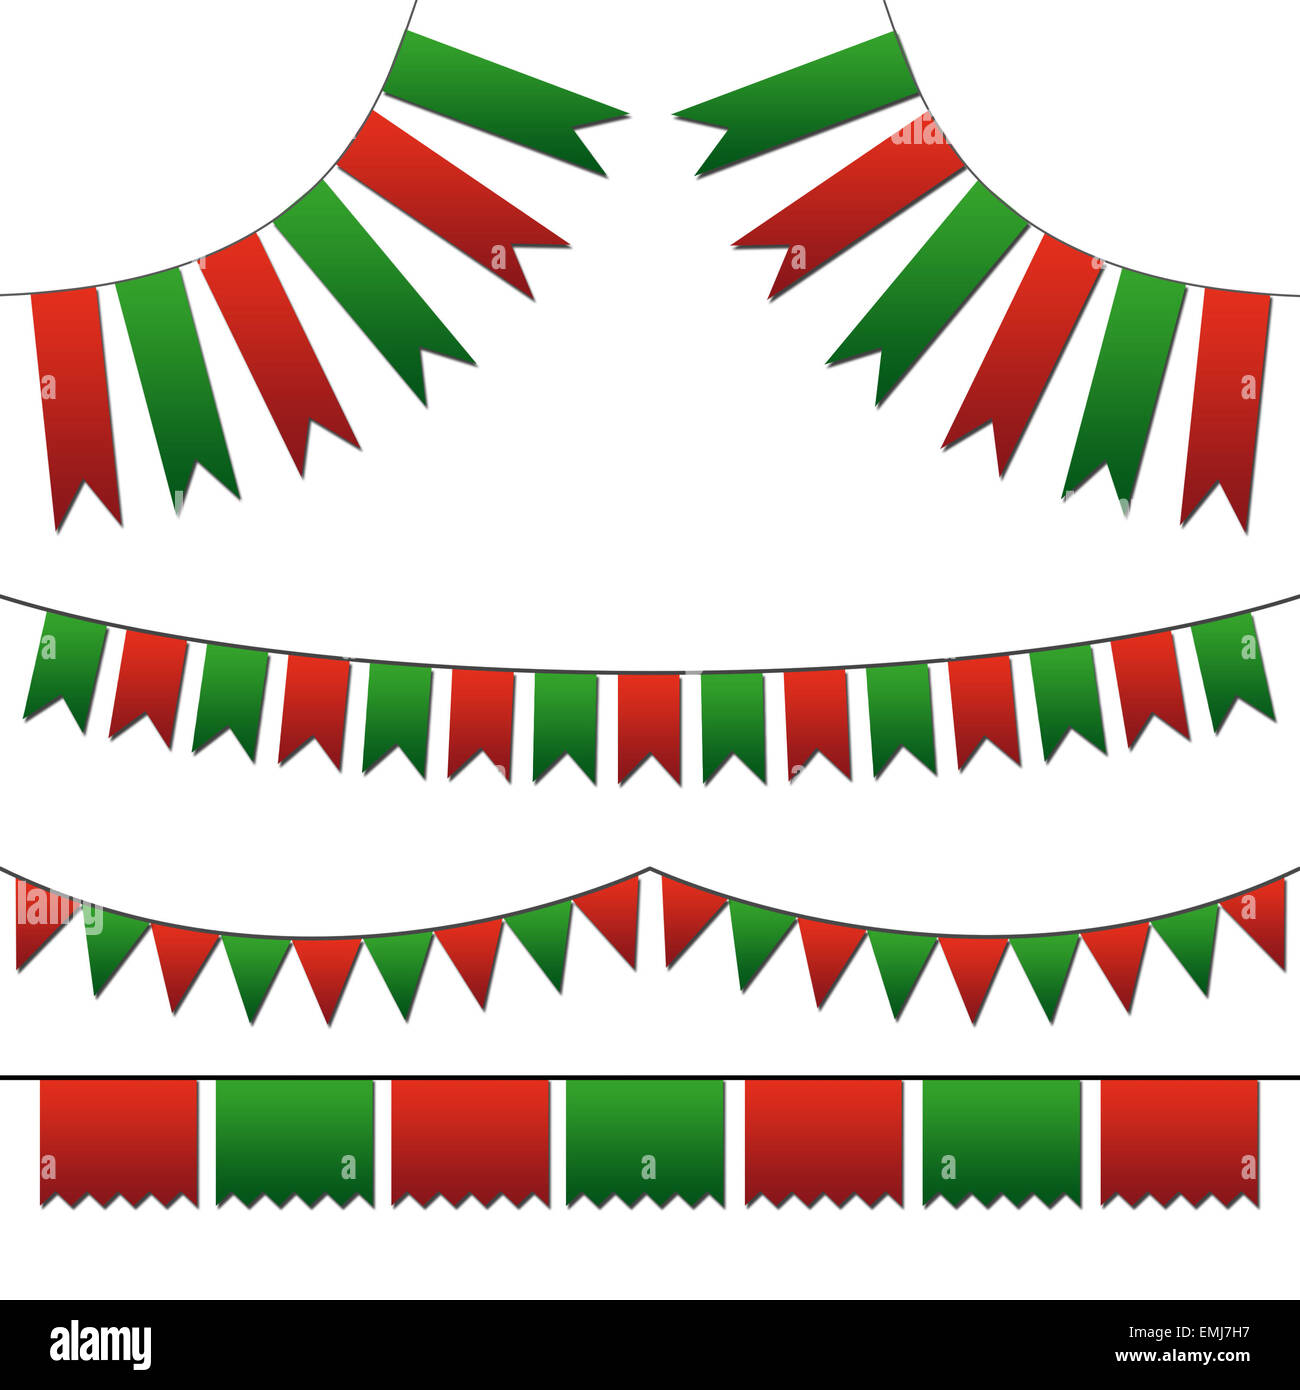 Red and Green buntingsfor decoration of invitations, greeting cards. Bunting flags Stock Photo